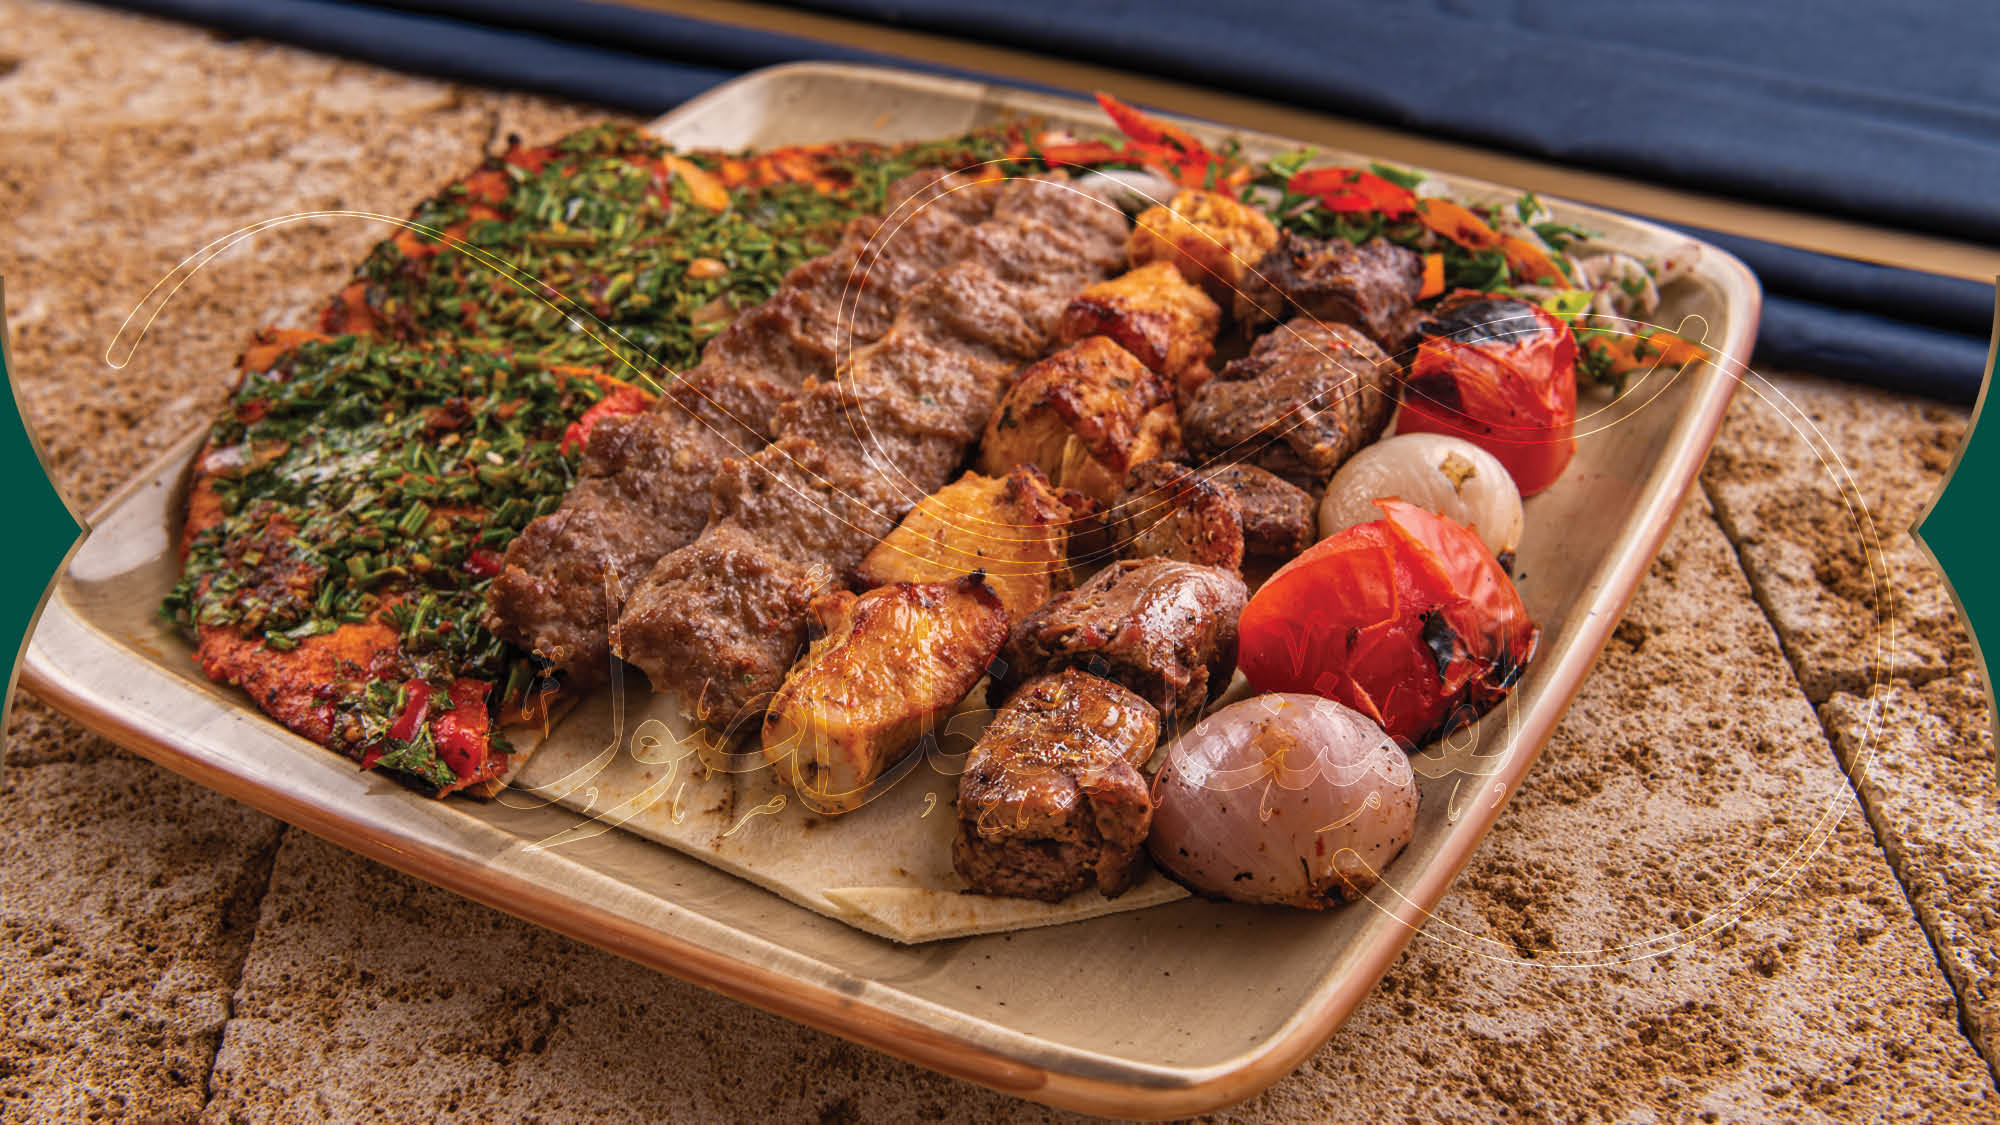 Why Are Grill and Barbeque Dishes Popular in the UAE?